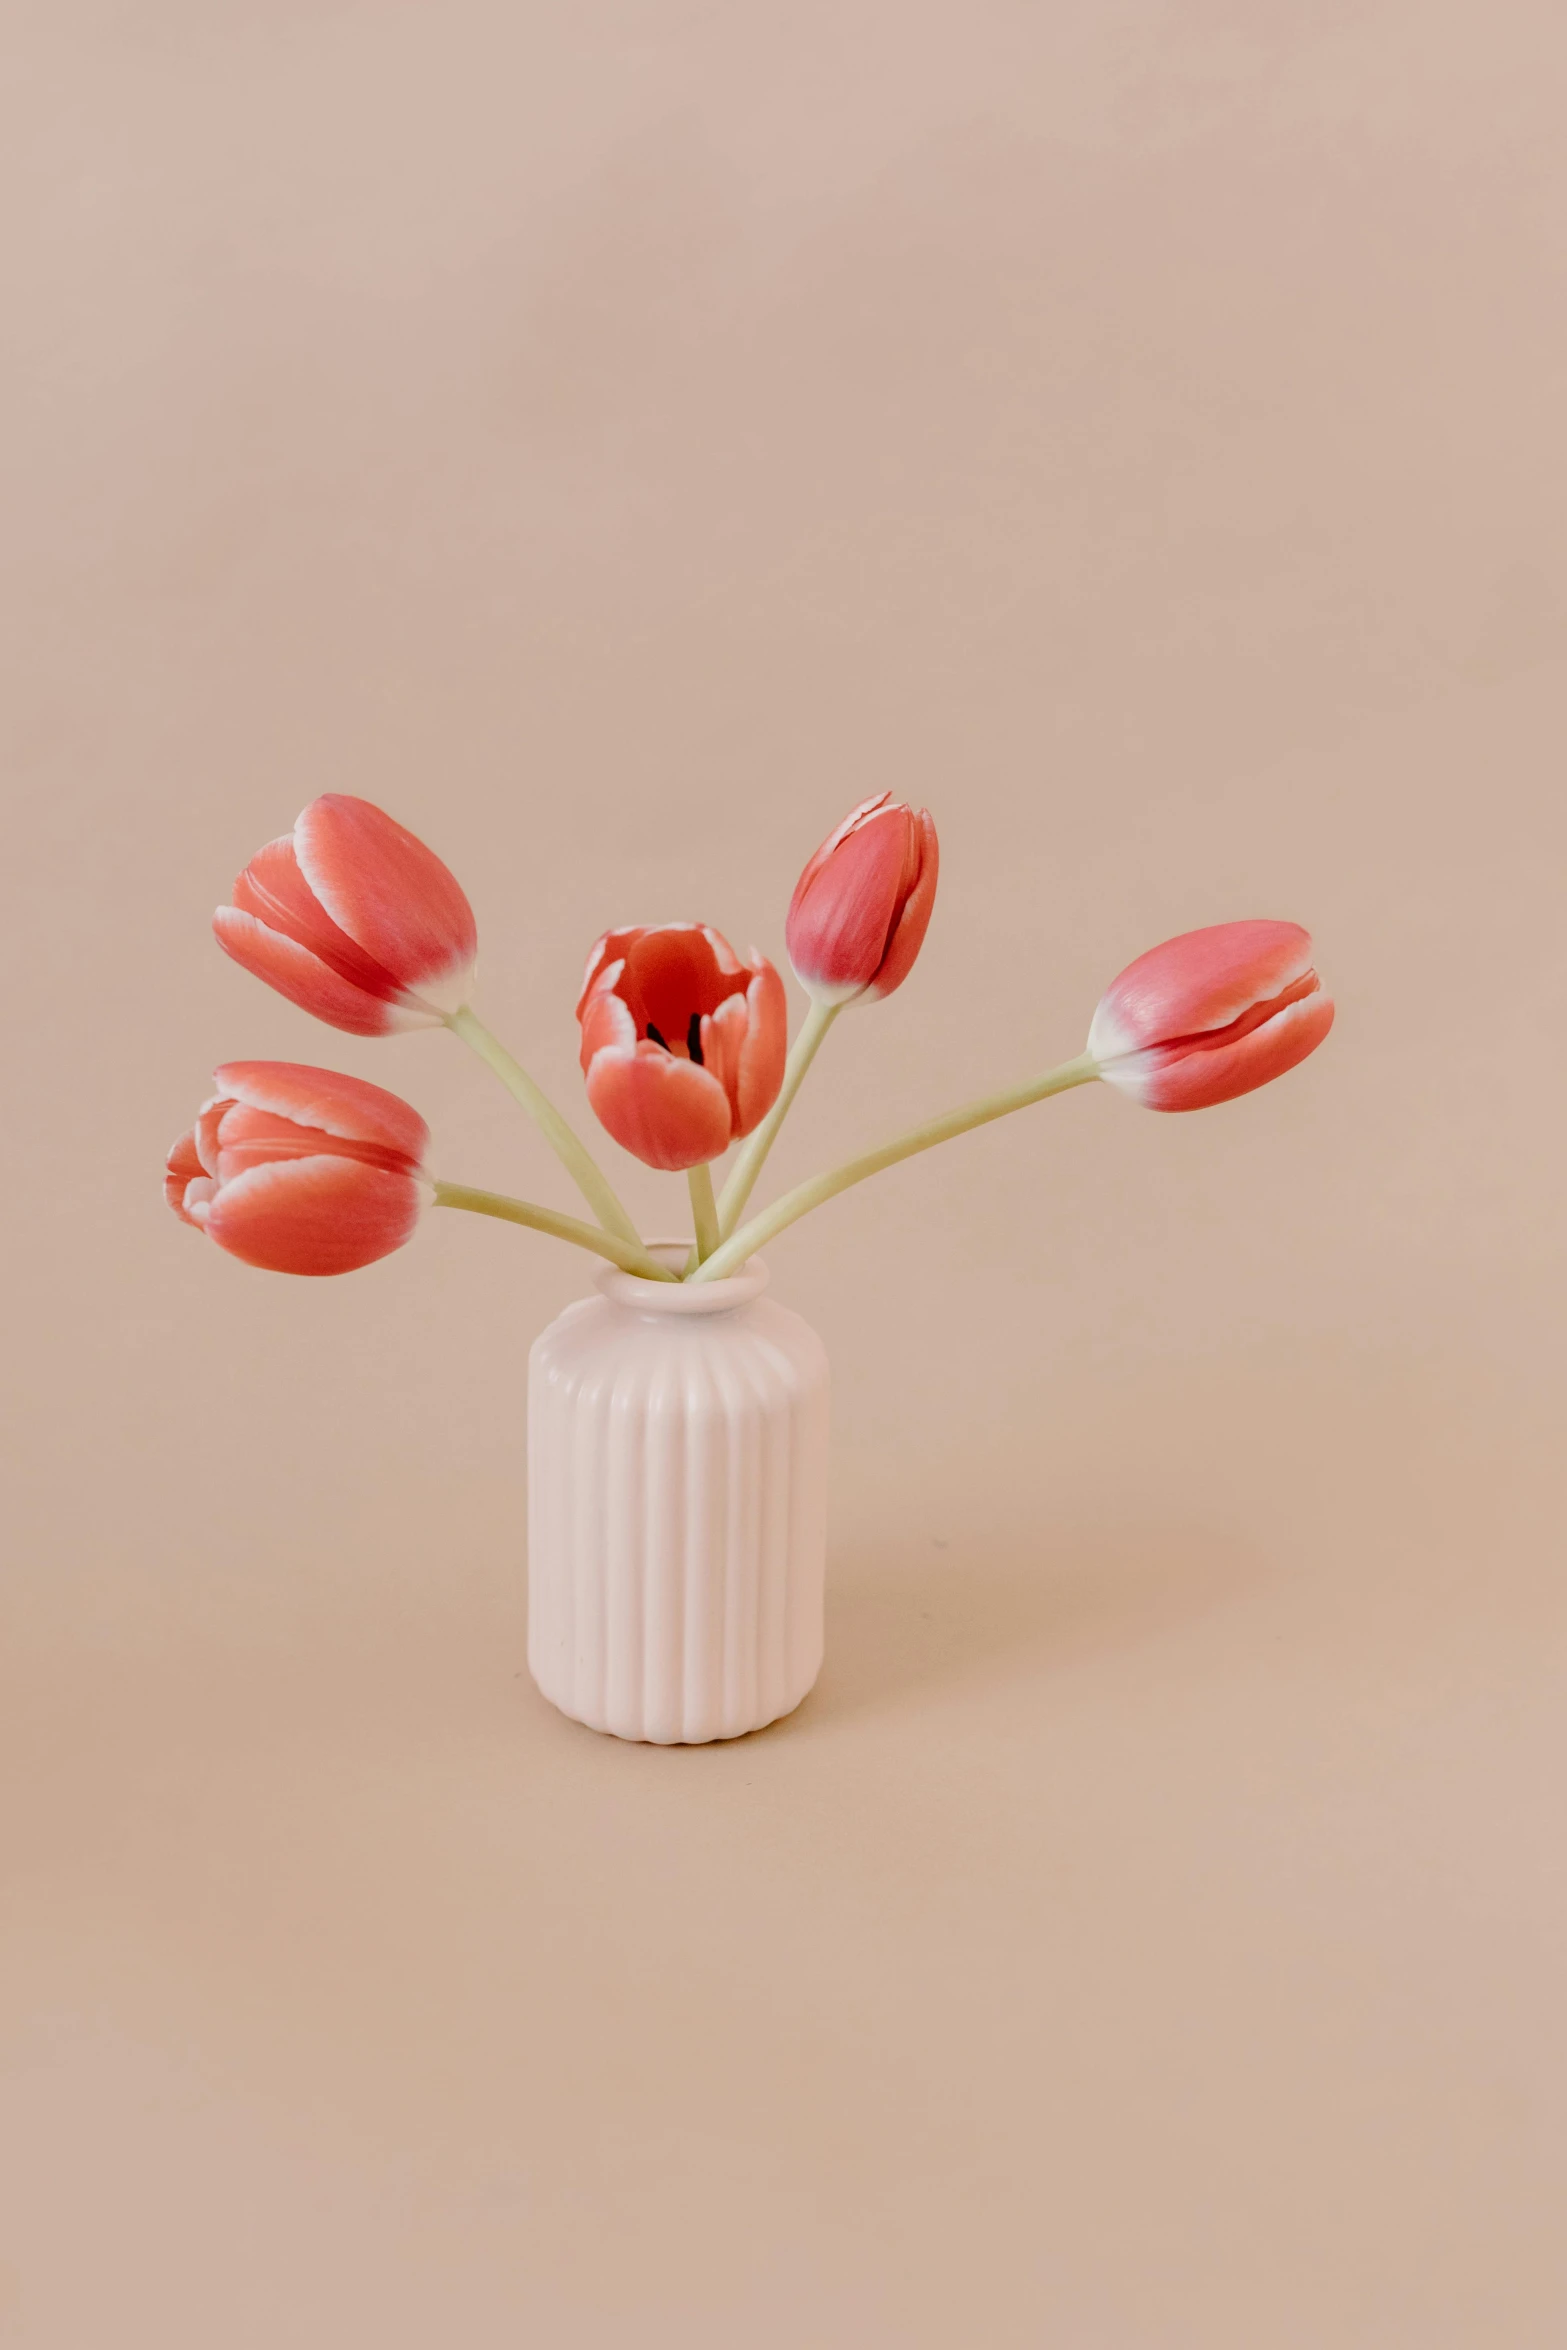 a white vase with pink tulips in it, a 3D render, unsplash contest winner, soft red tone colors, miniature product photo, fully posable, jen atkin